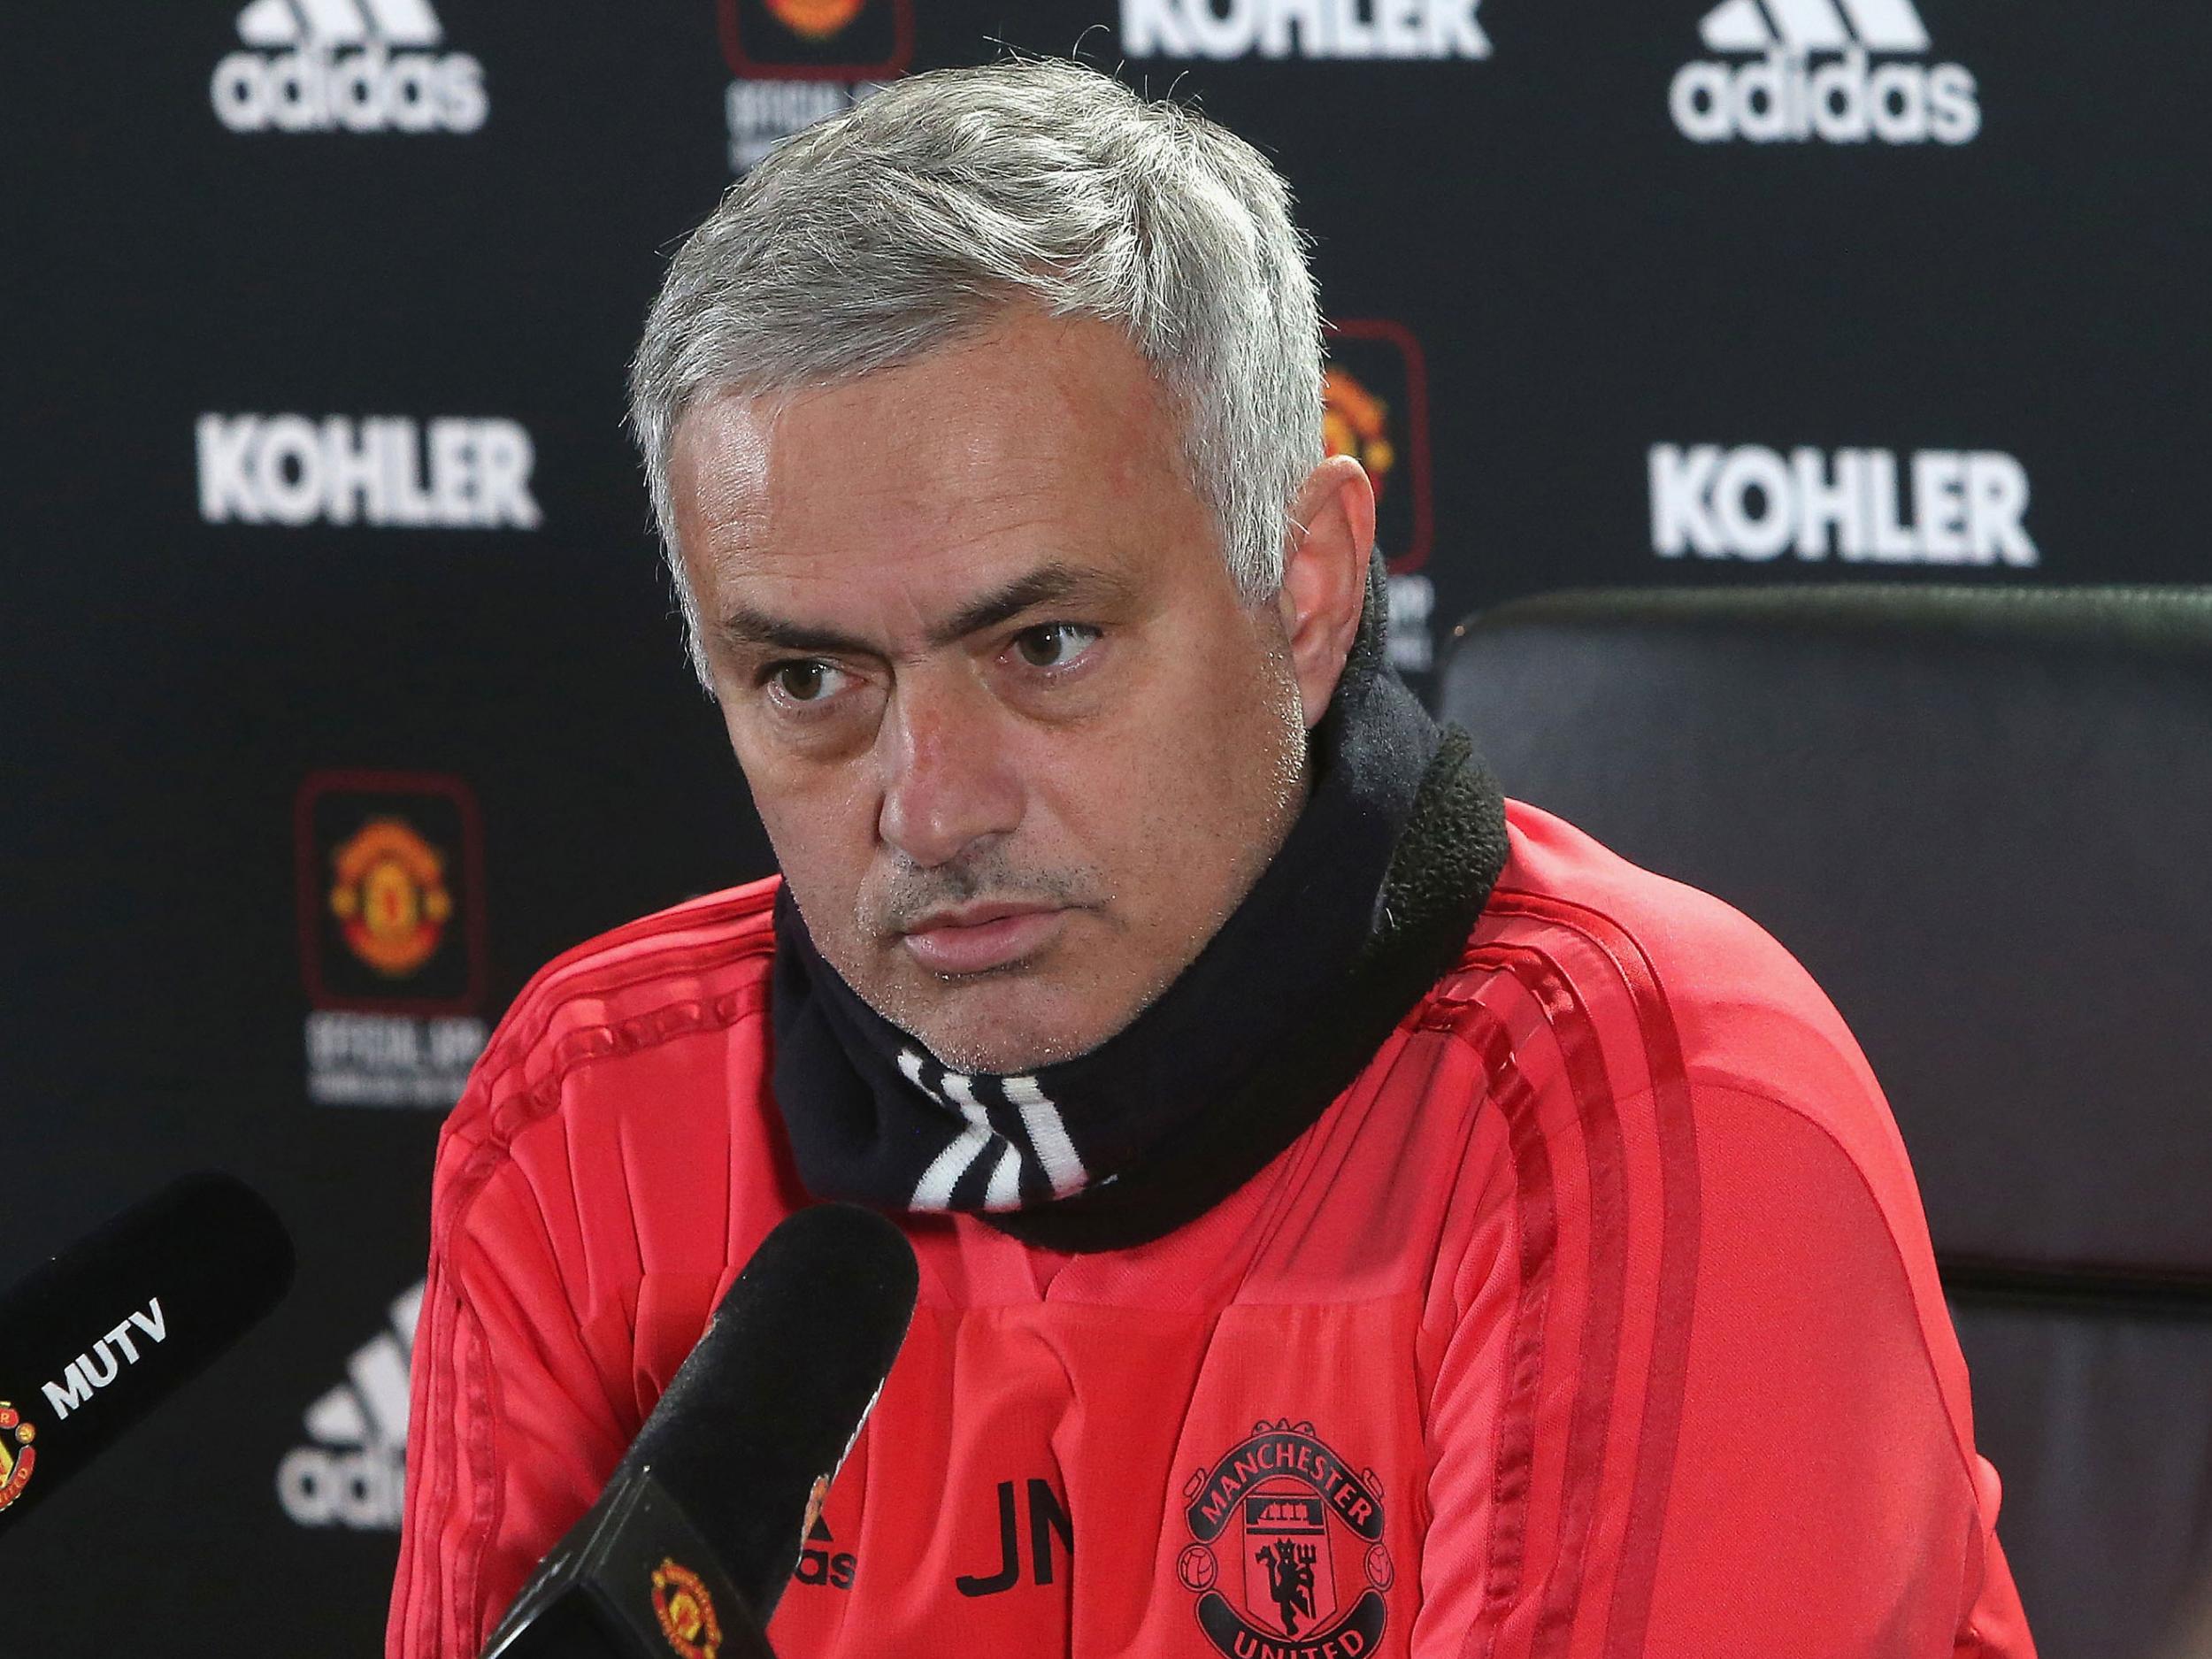 Jose Mourinho press conference LIVE - Latest Manchester United team news ahead of Crystal Palace tie